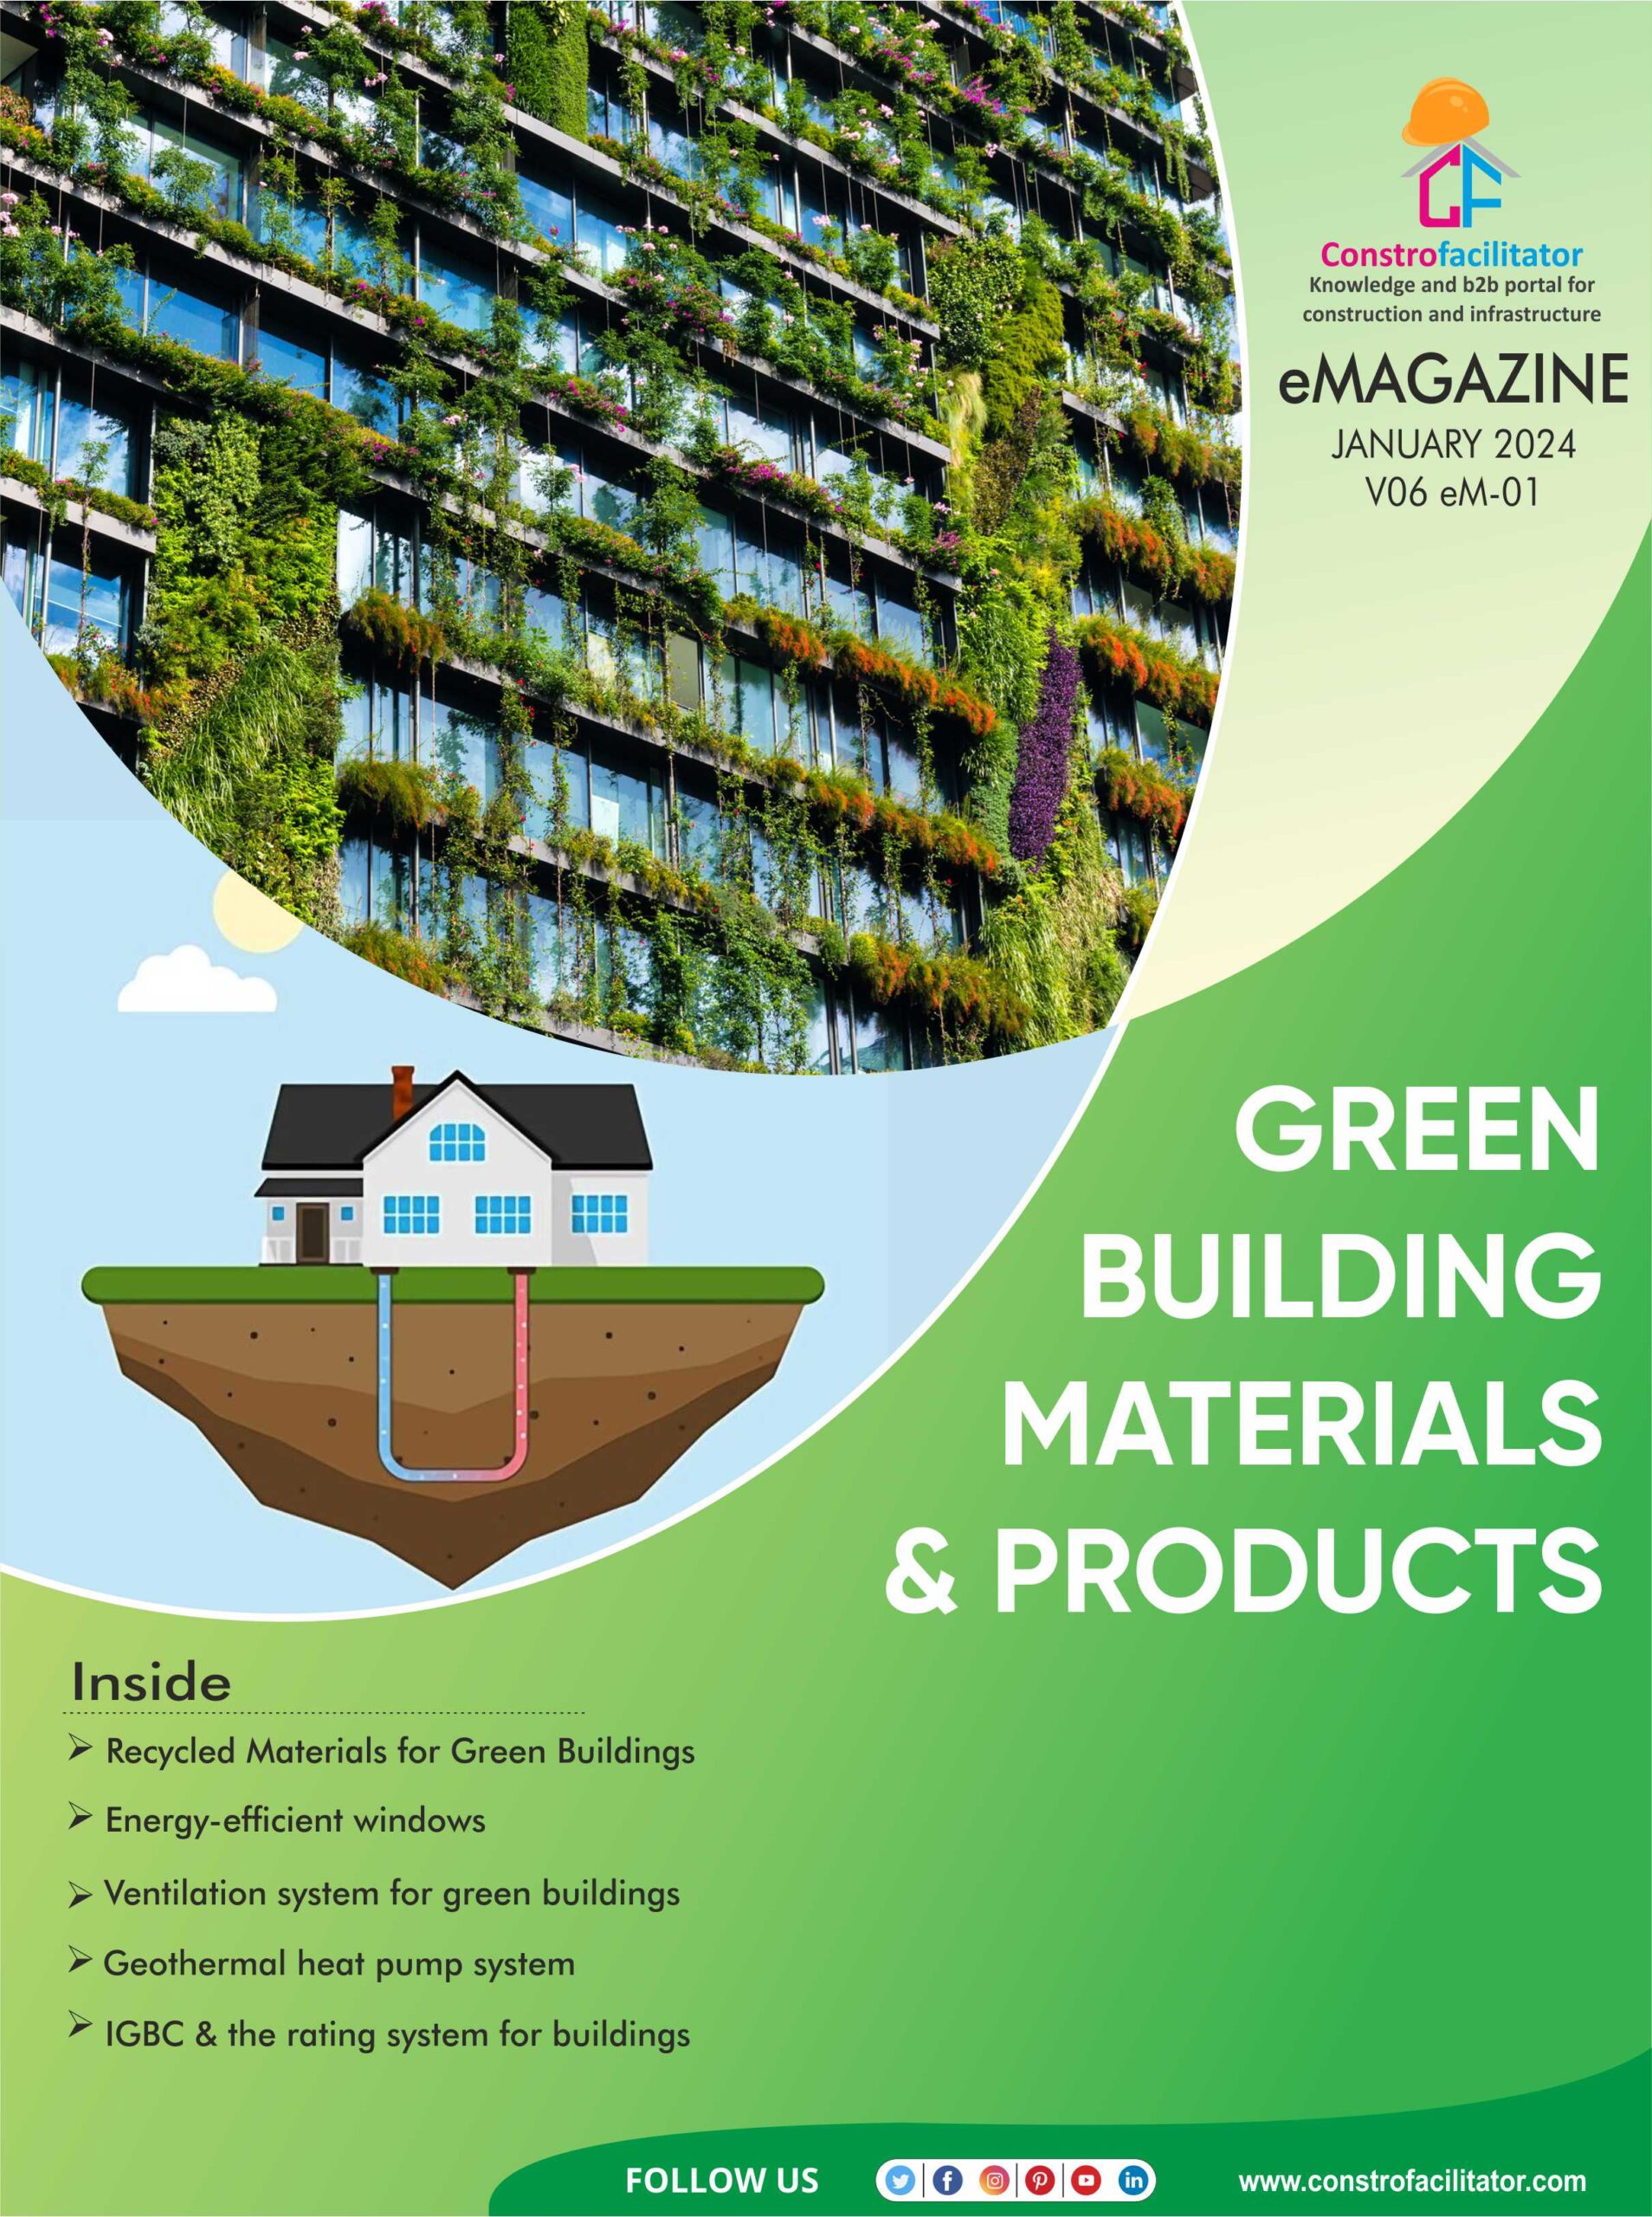 Green Building Materials & Products